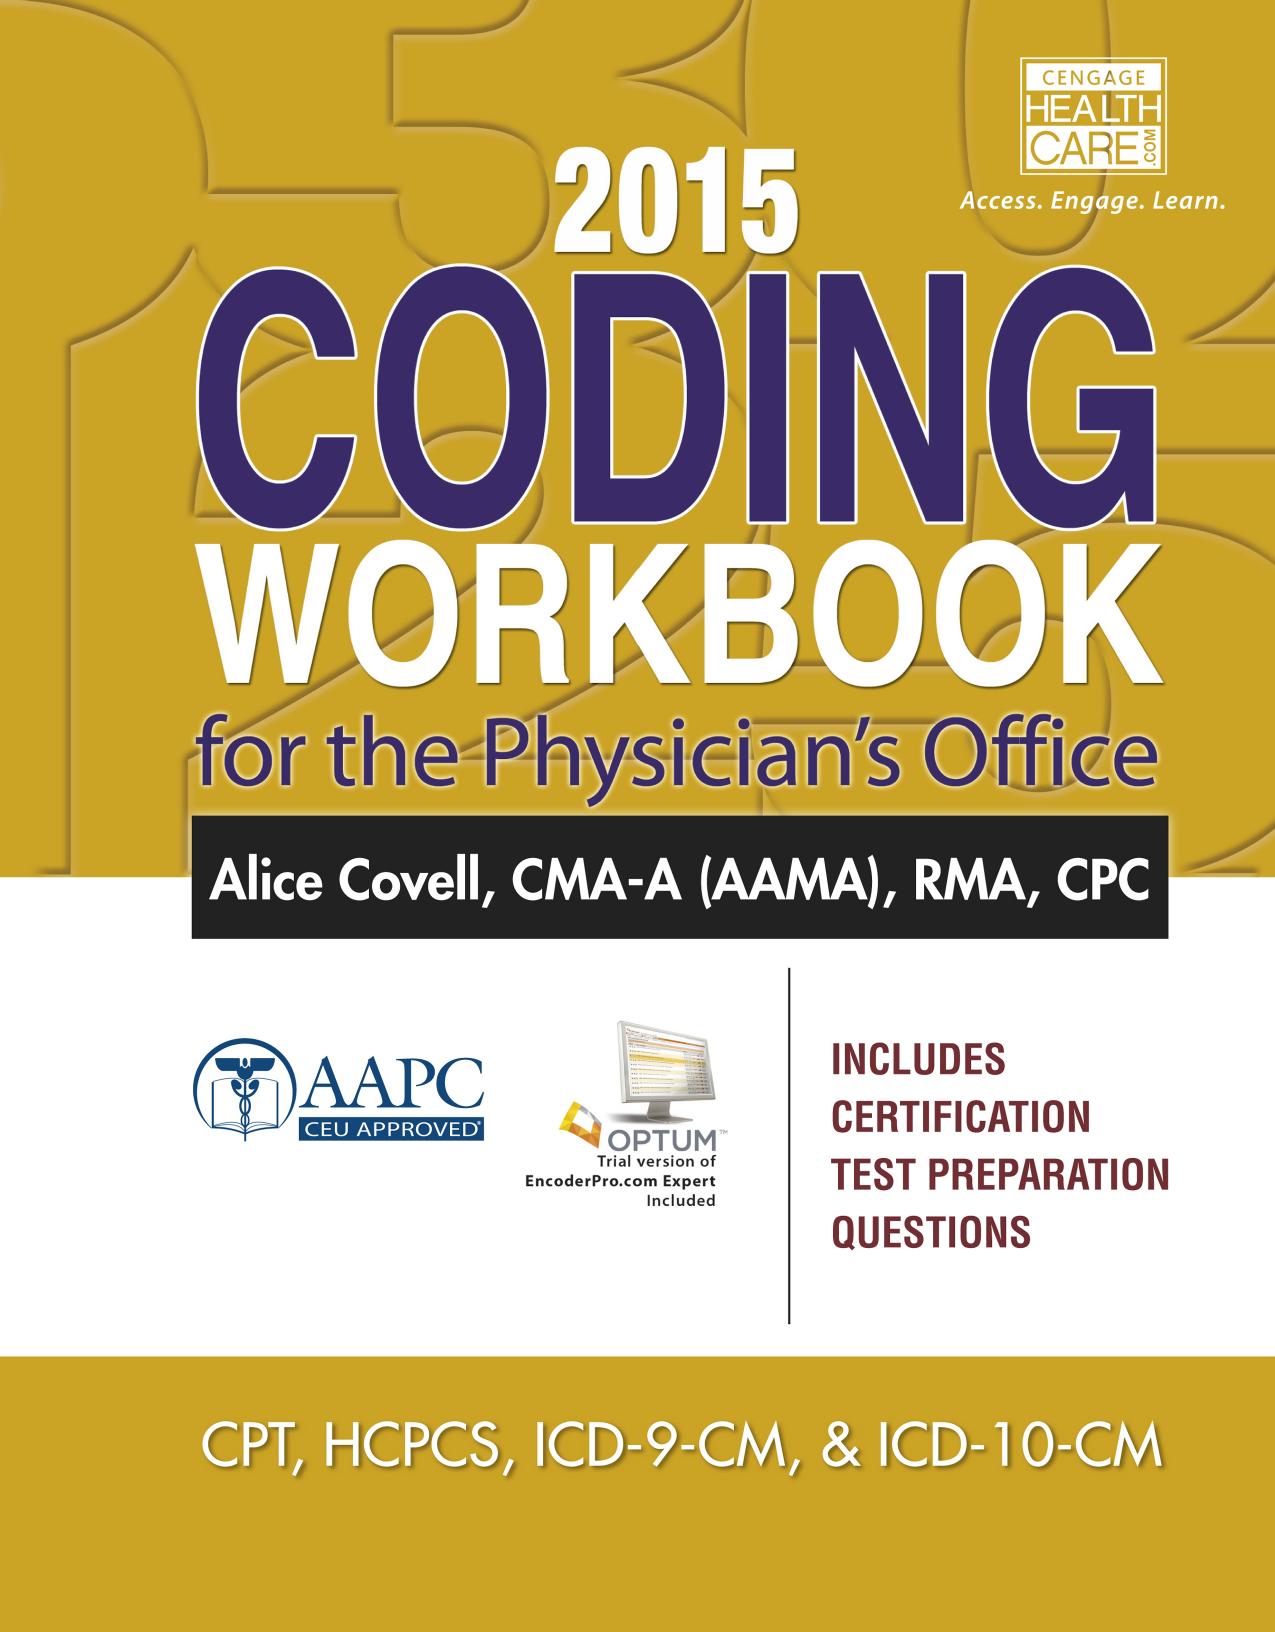 2015 Coding Workbook for the Physician's Office.jpg